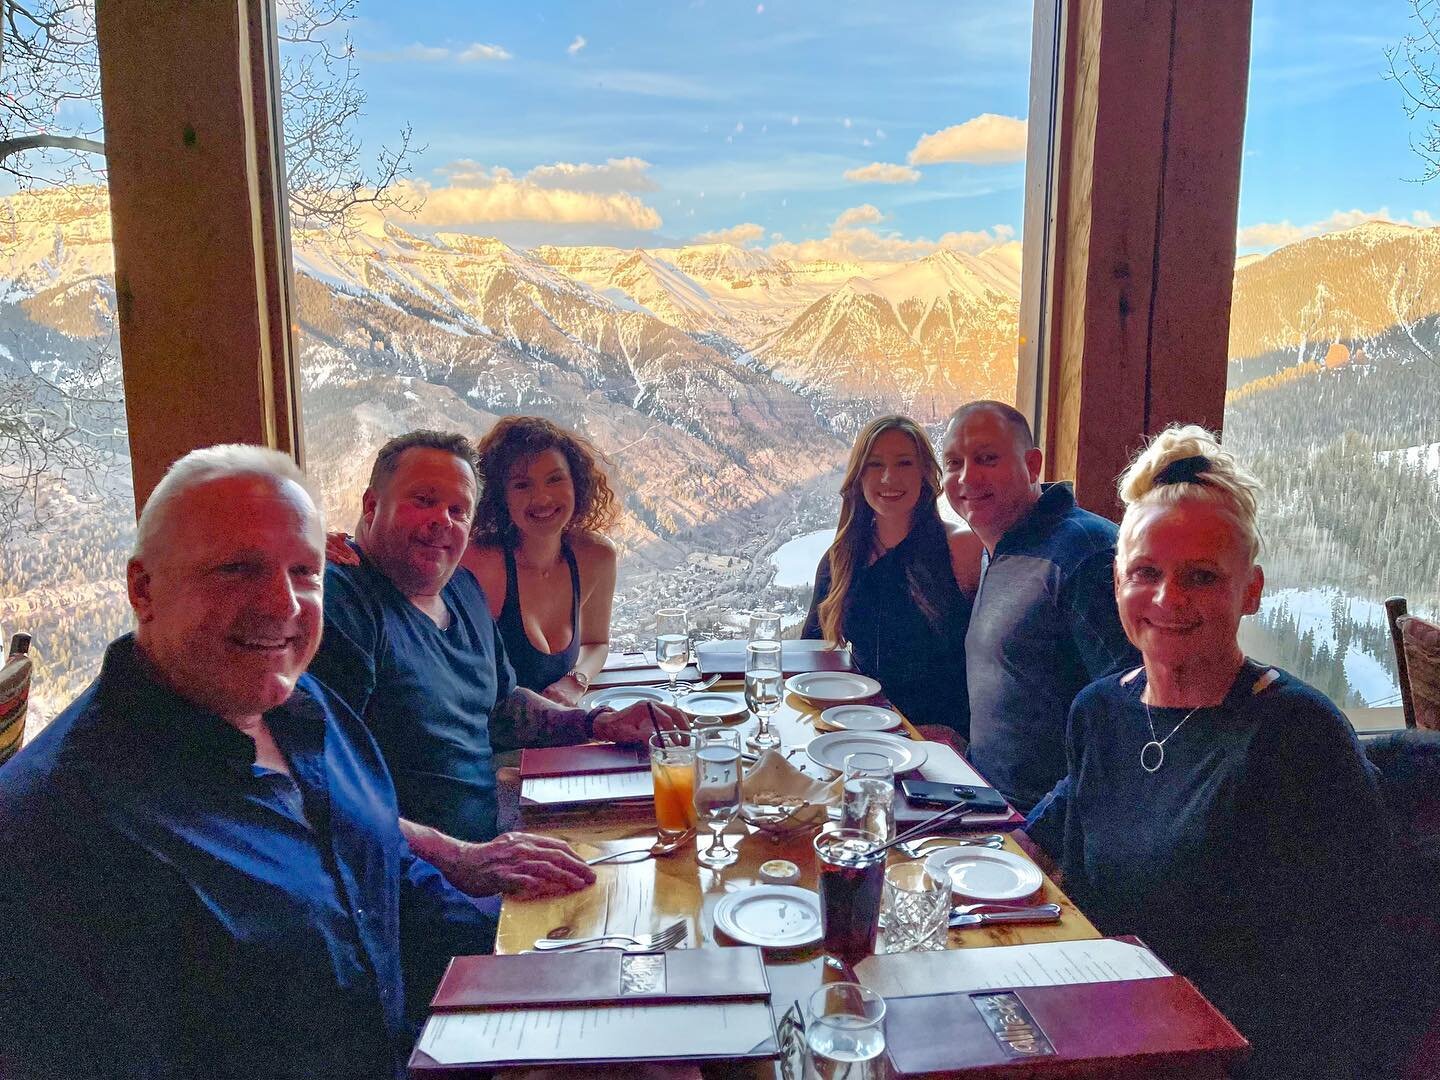 This dinner view 🙌🏼 with the best family! 
Night 3 dinner at @allredsrestaurant at the top of the mountain, transportation by gondola only! Then we took the gondola down into Telluride for the dessert course @newsheridanchop Where we ate the night 